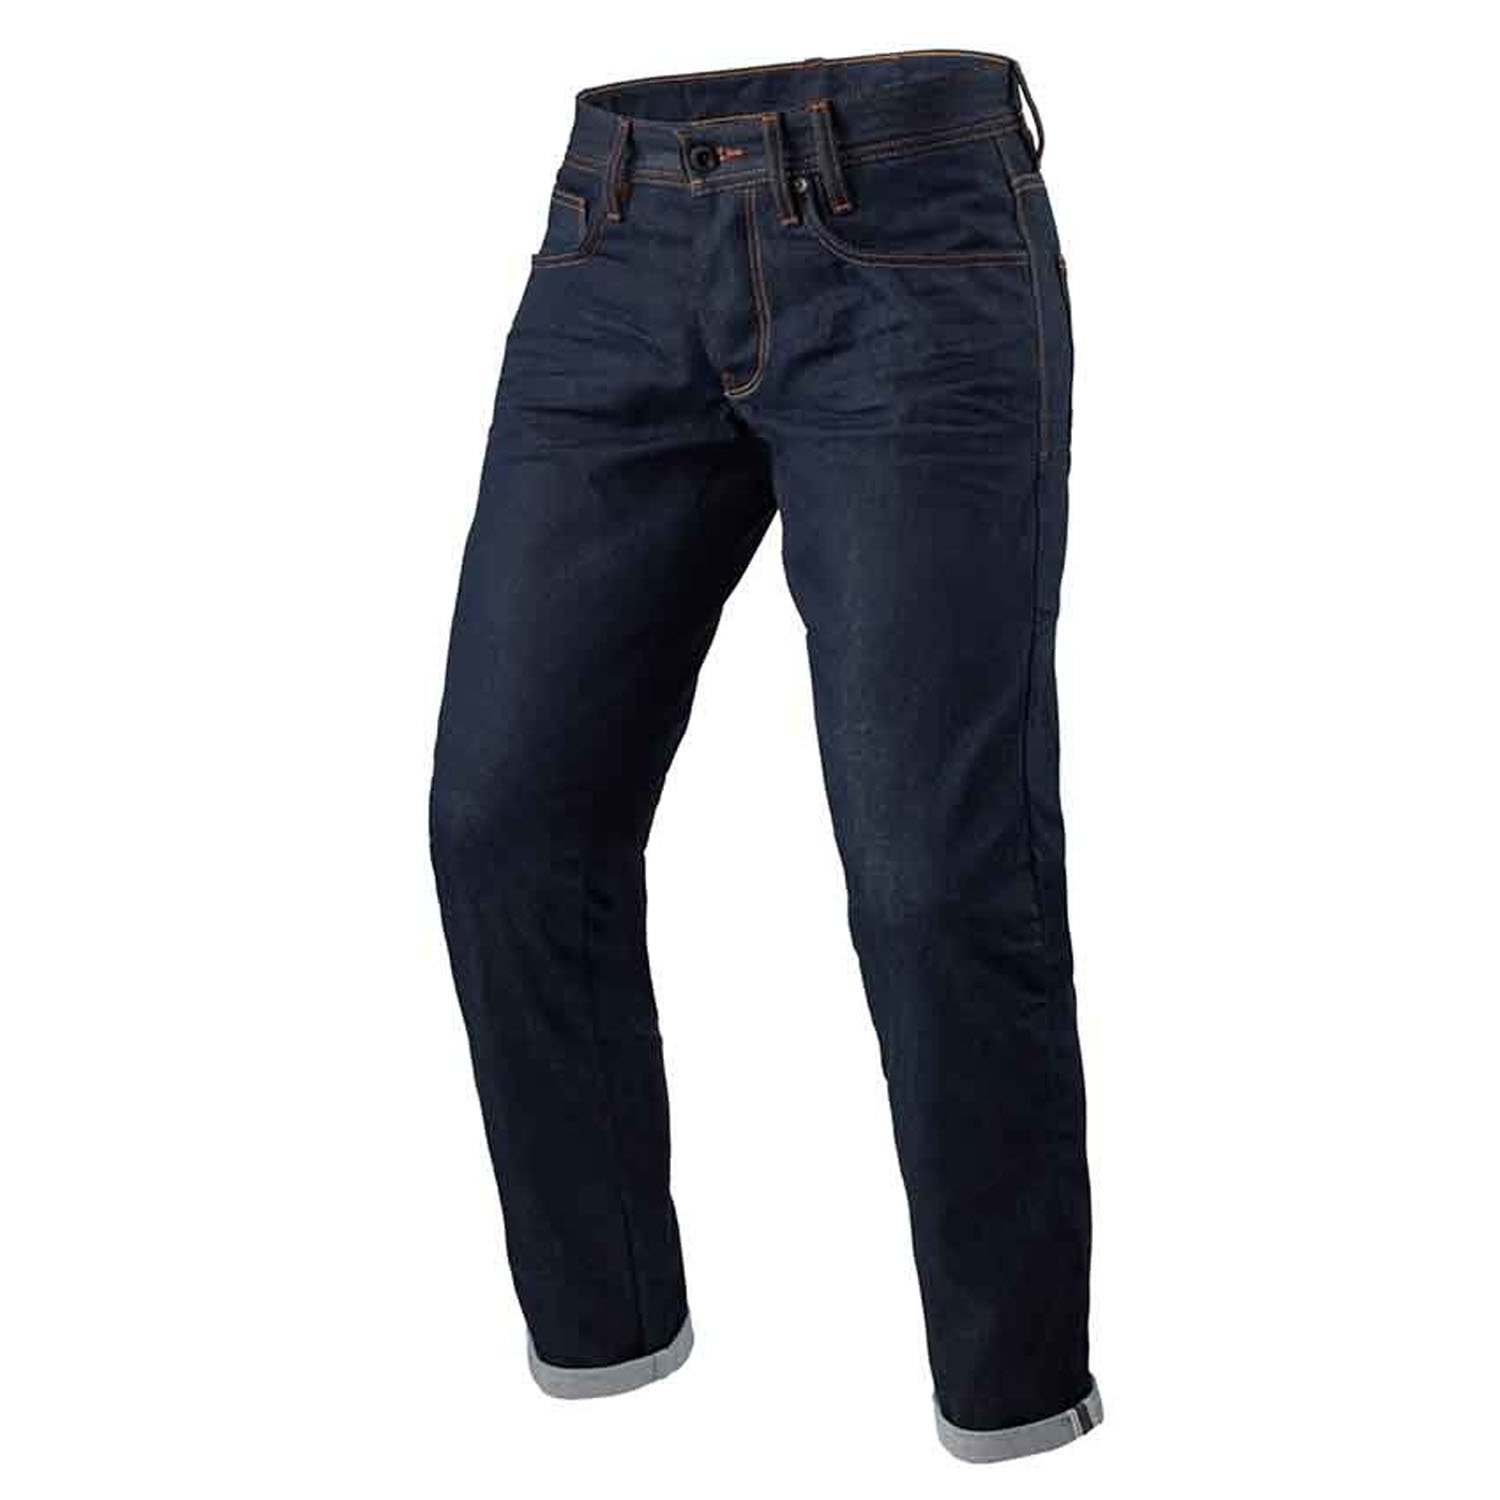 Image of REV'IT! Jeans Lewis Selvedge TF Dark Blue L36 Motorcycle Pants Size L36/W36 ID 8700001358149